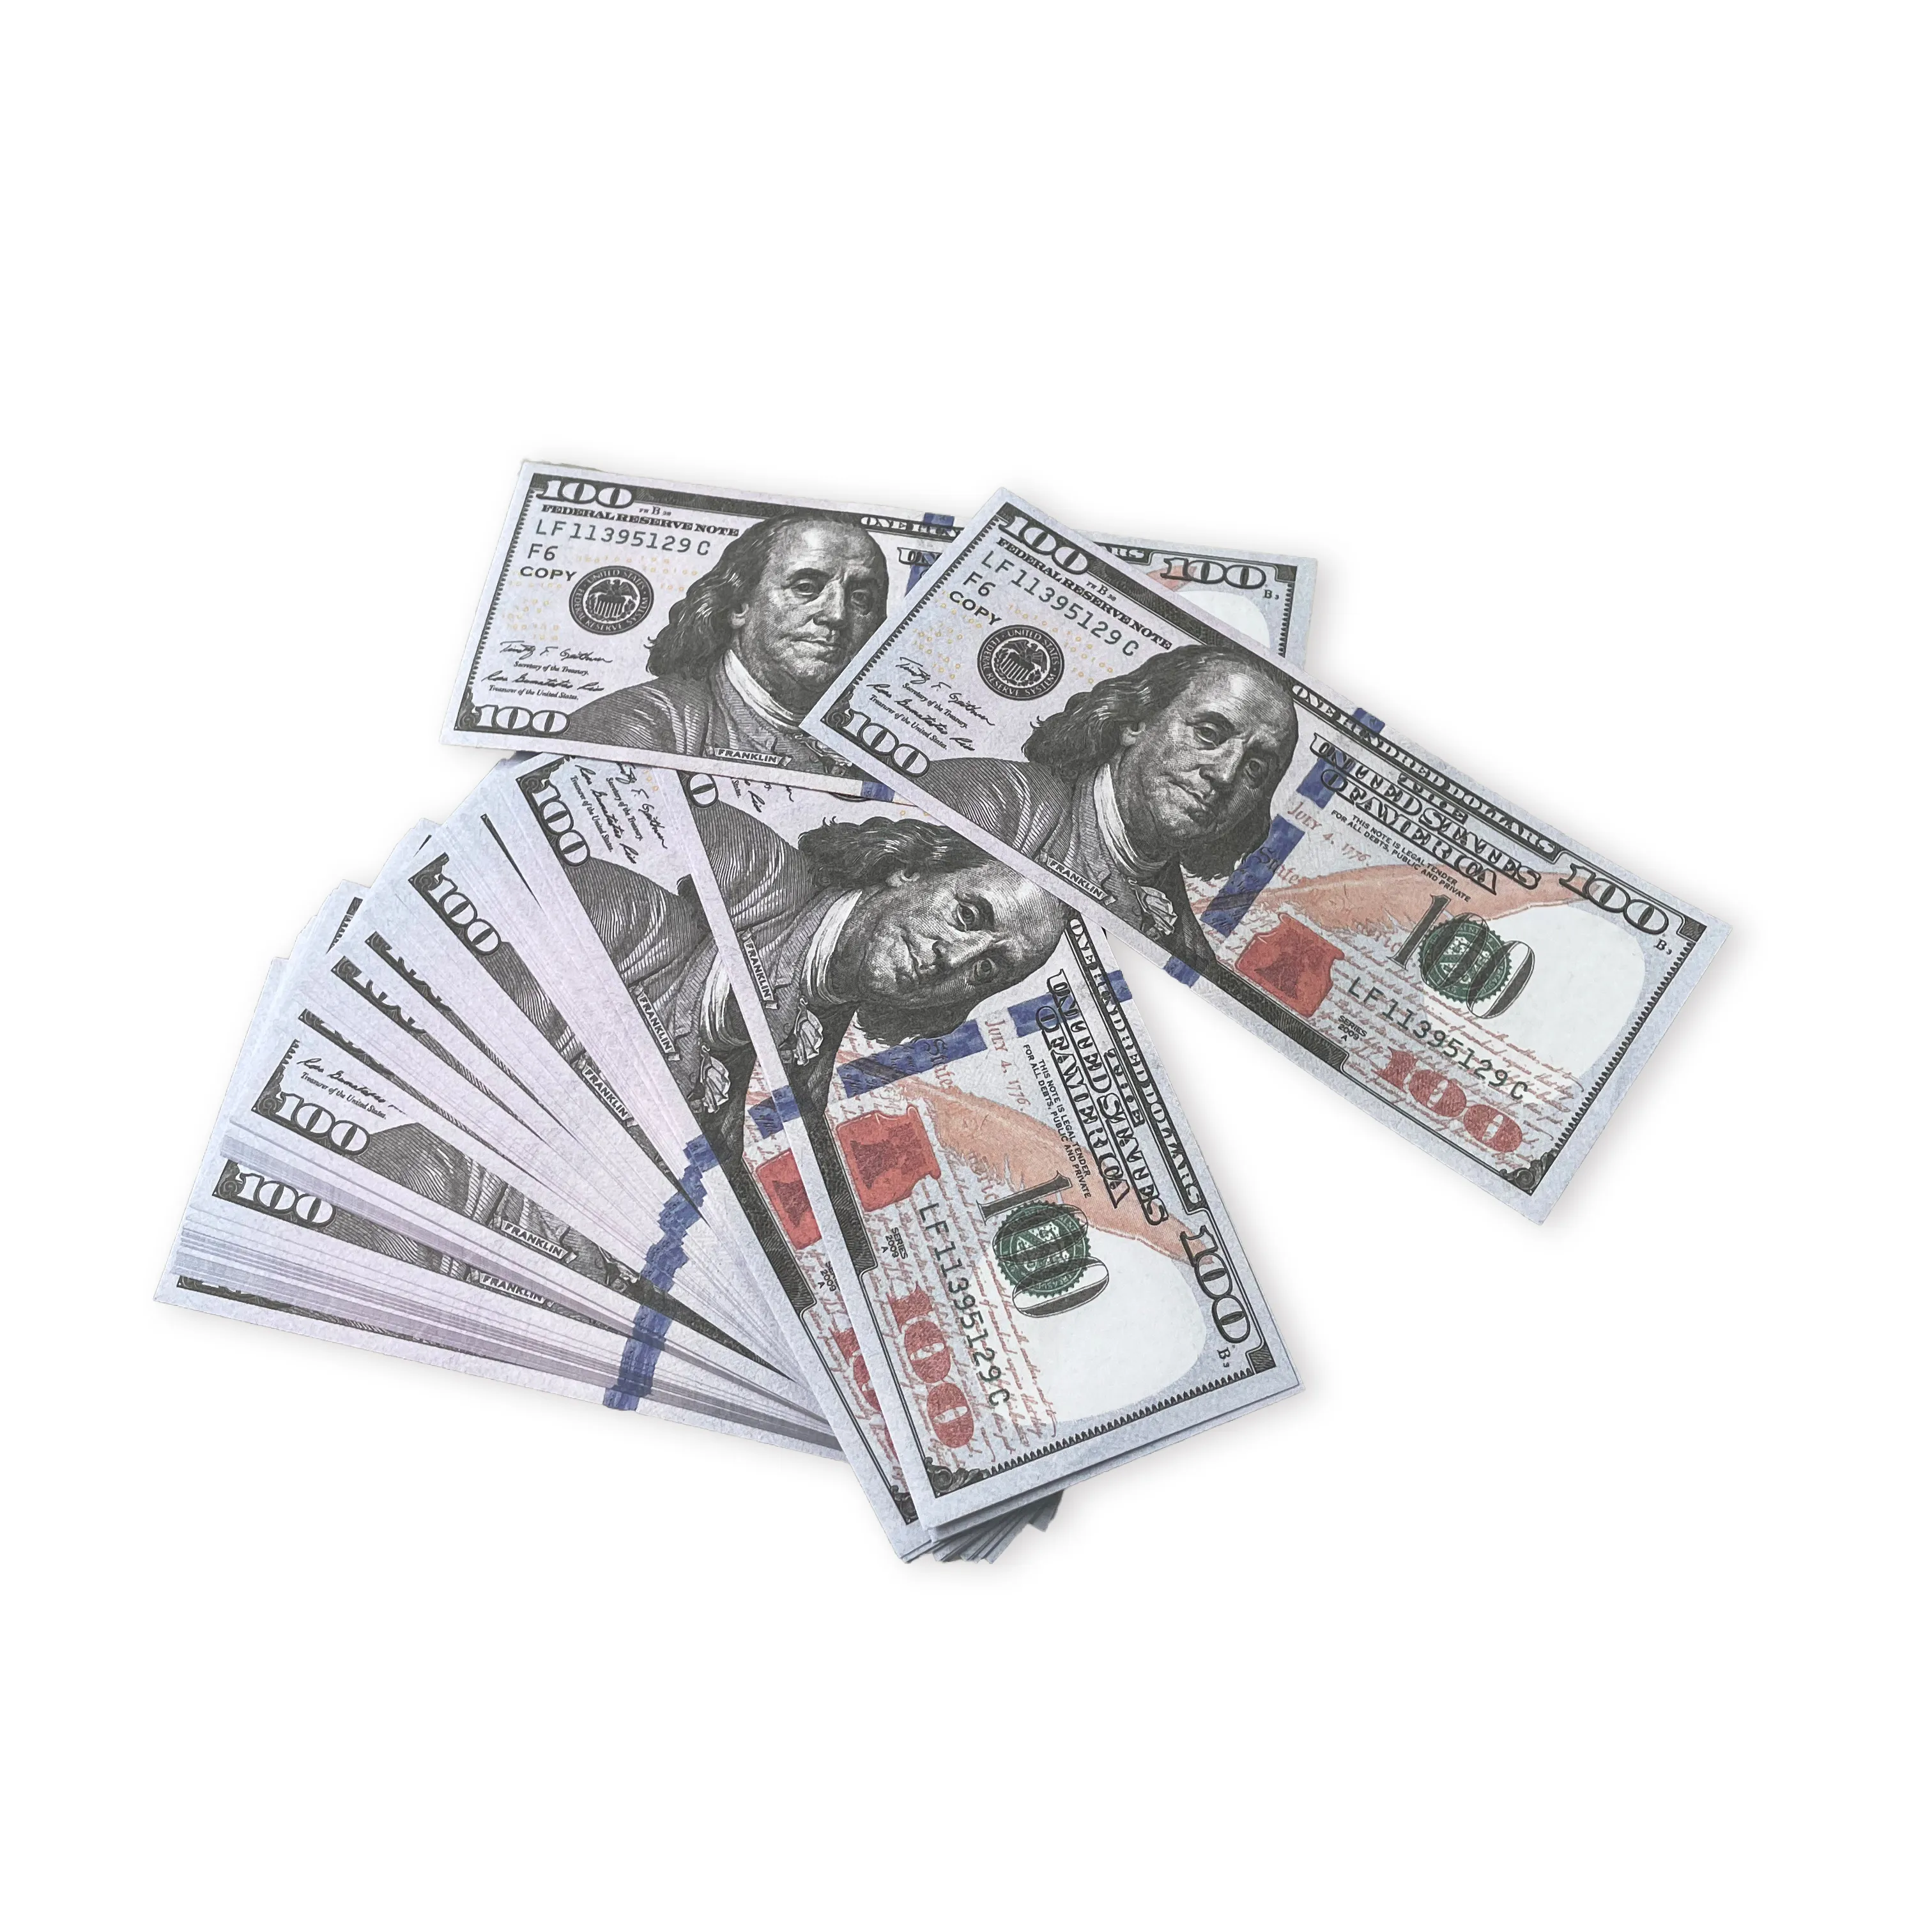 Mini Prop Money For Movies, Music Videos, Halloween, Play Pretend And Birthday Parties